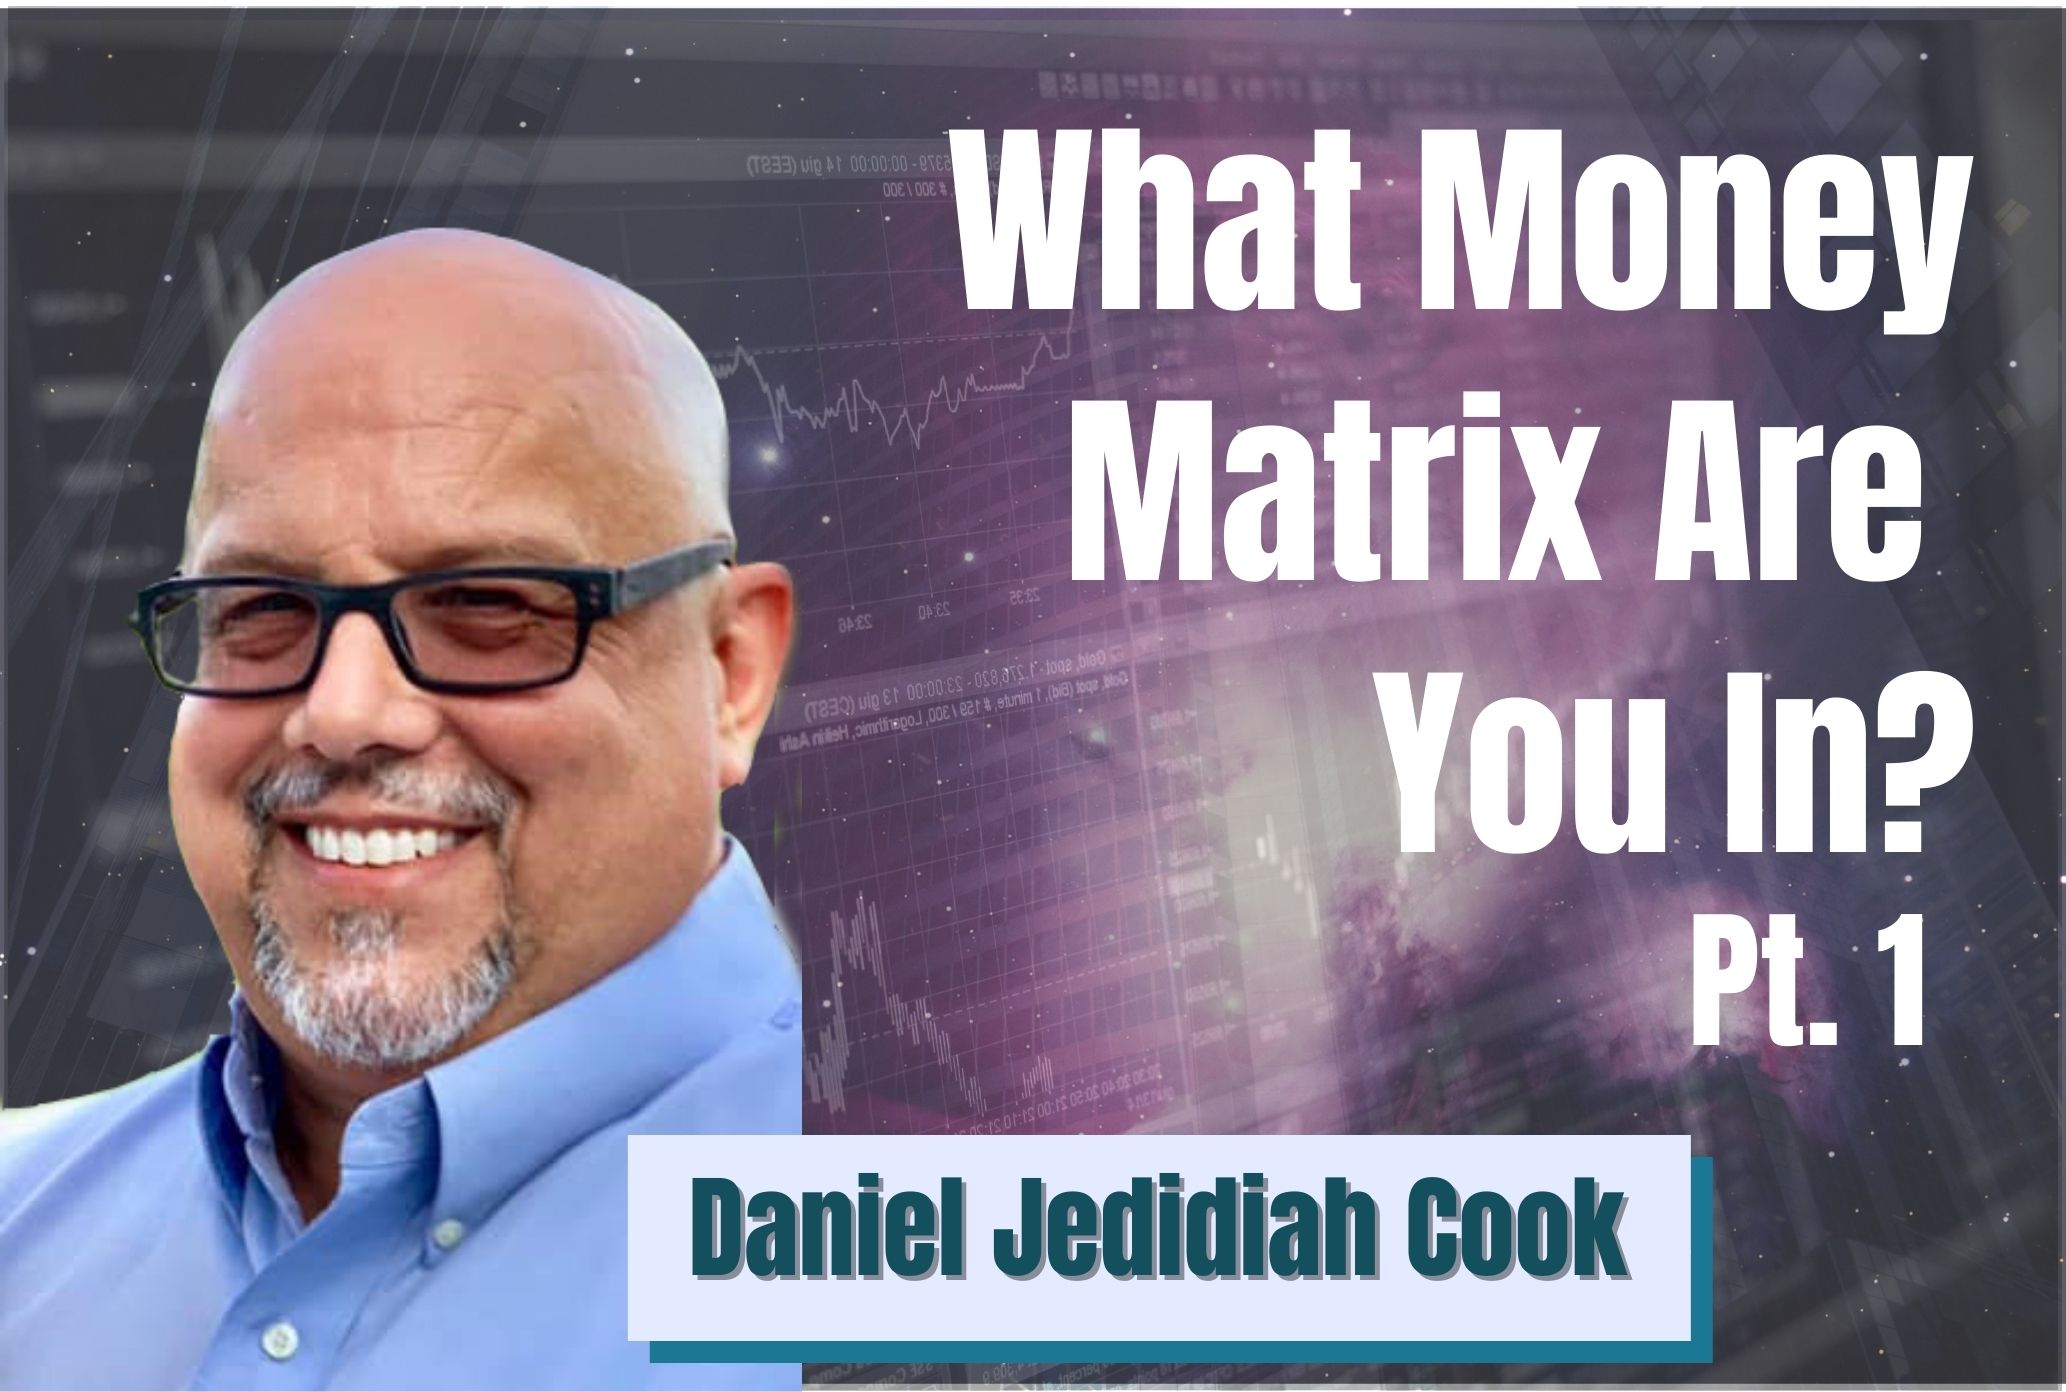 94: Pt. 1 What Money Matrix Are You In? – Daniel Jedidiah Cook on Spirit-Centered Business